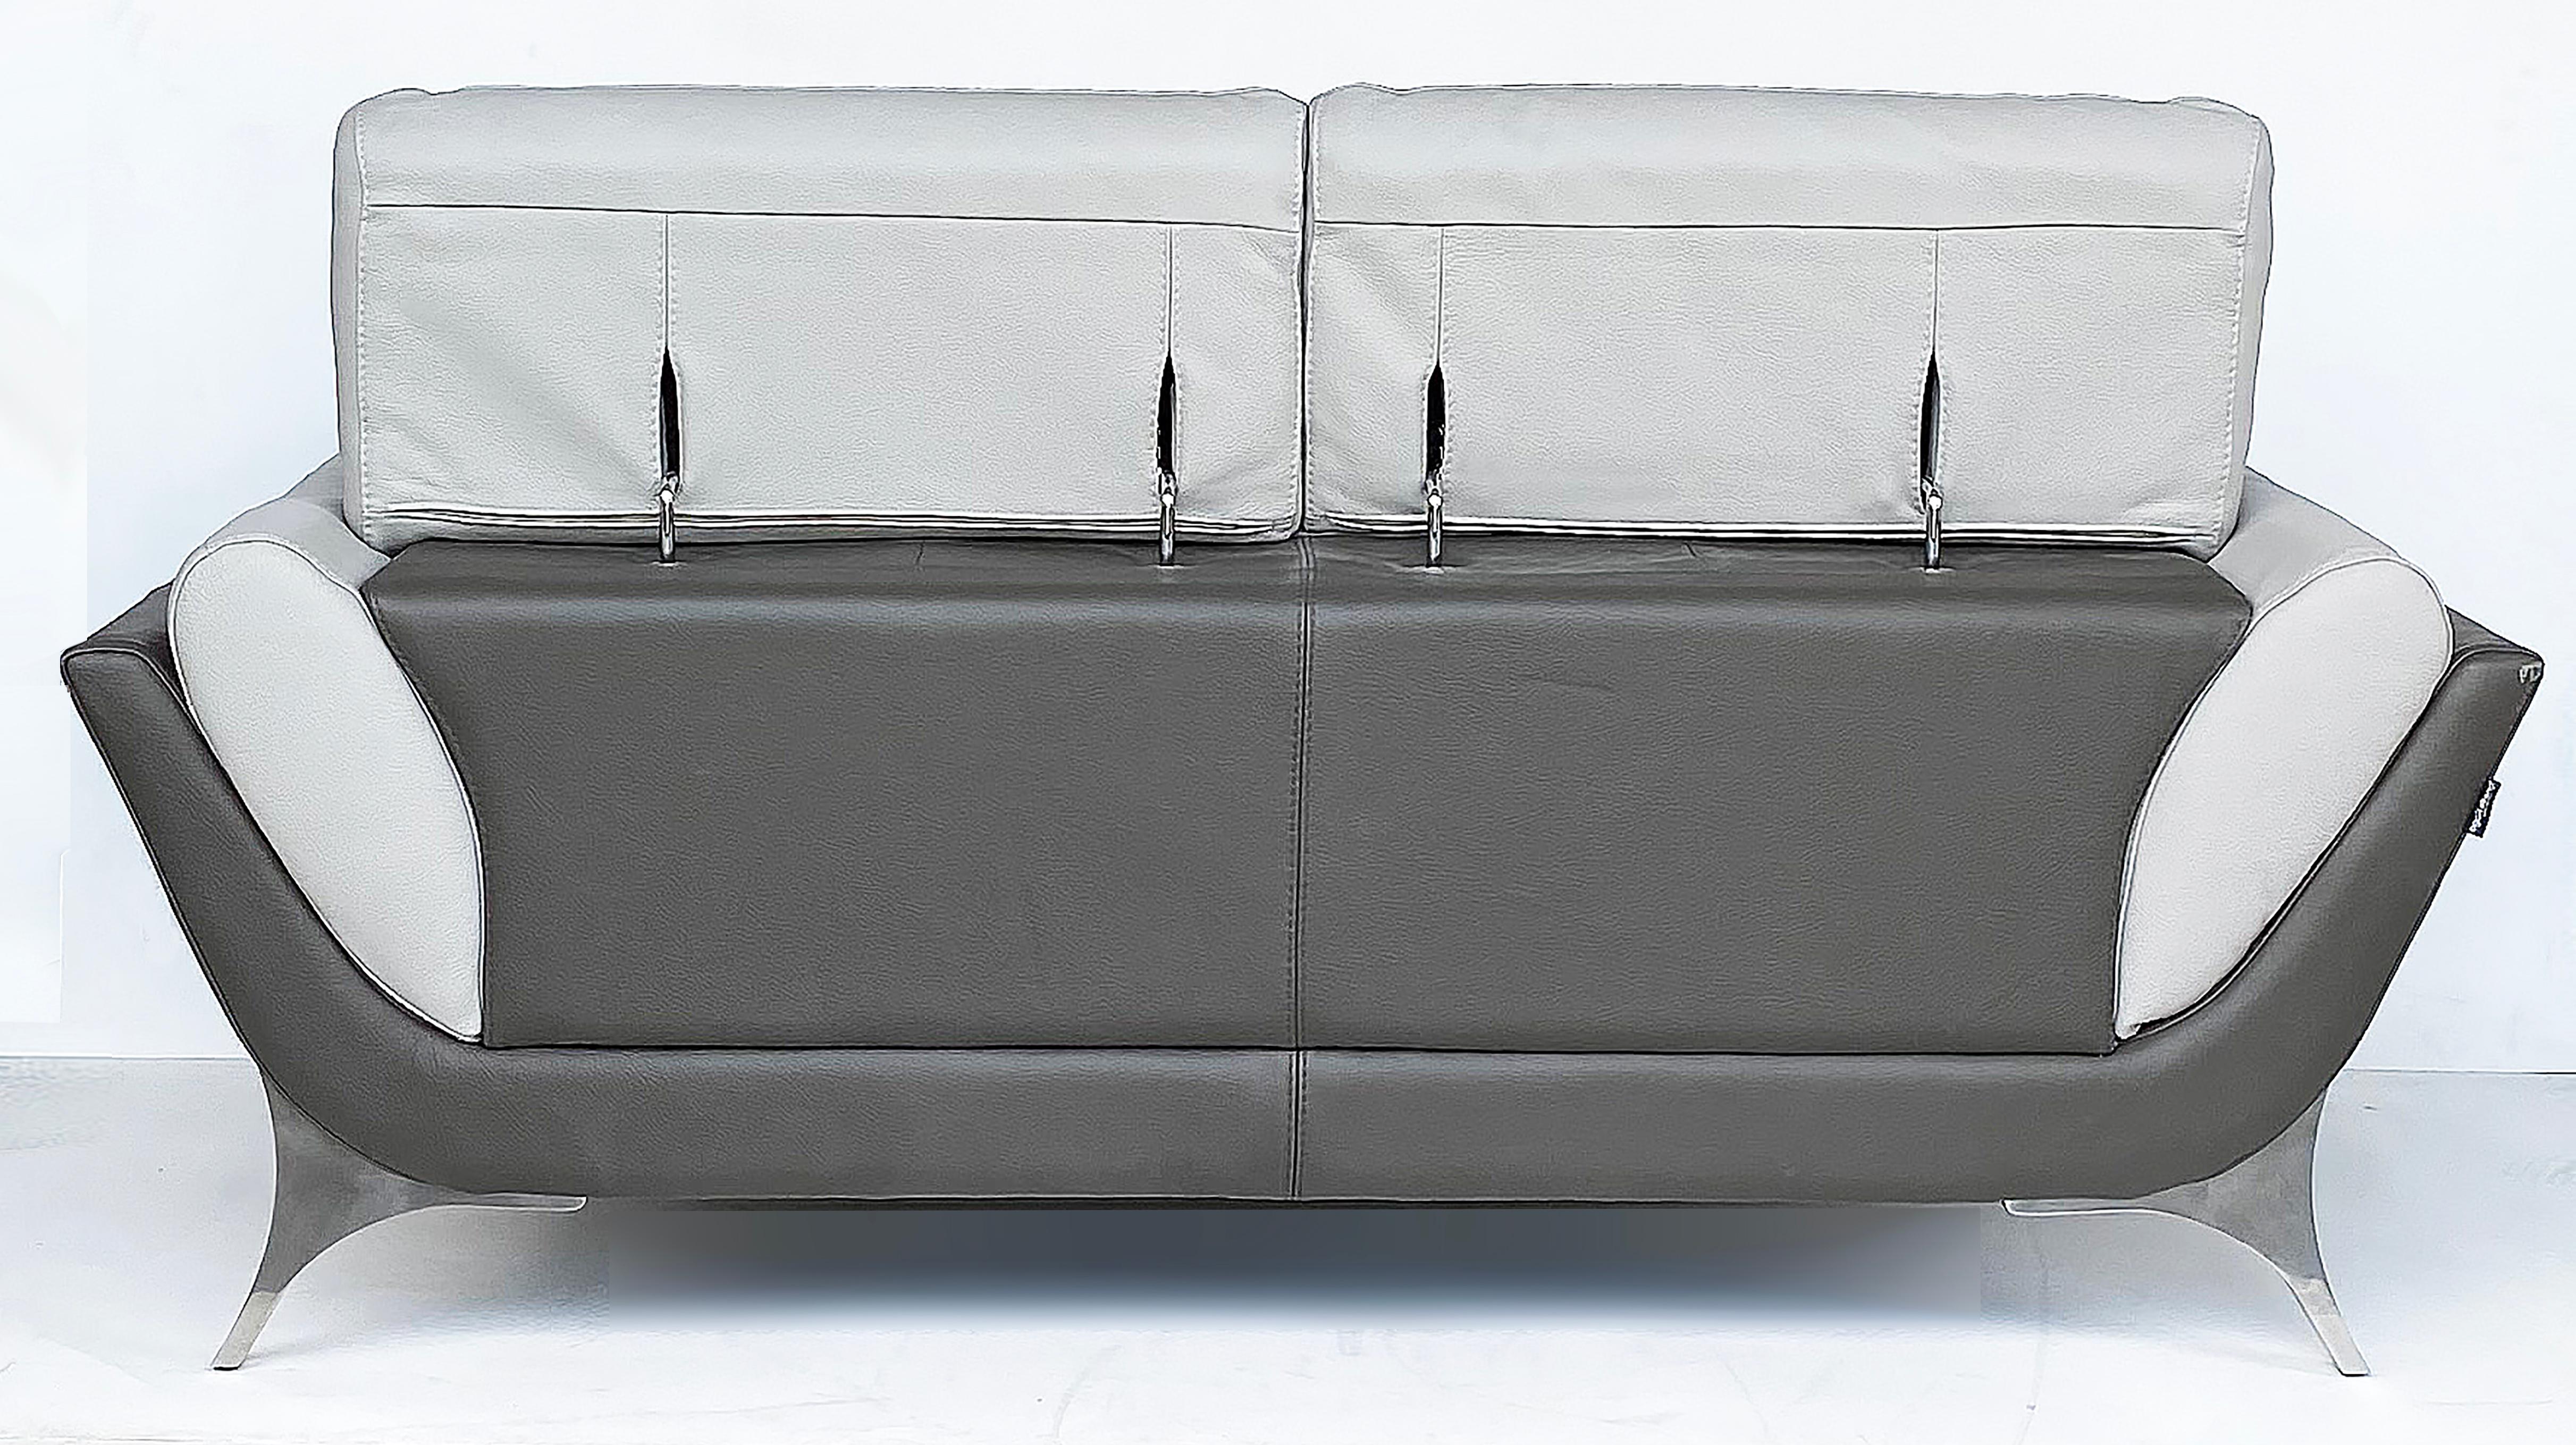 Modern Egoitaliano Leather Sofa with Adjustable Headrests and Stainless Steel Legs